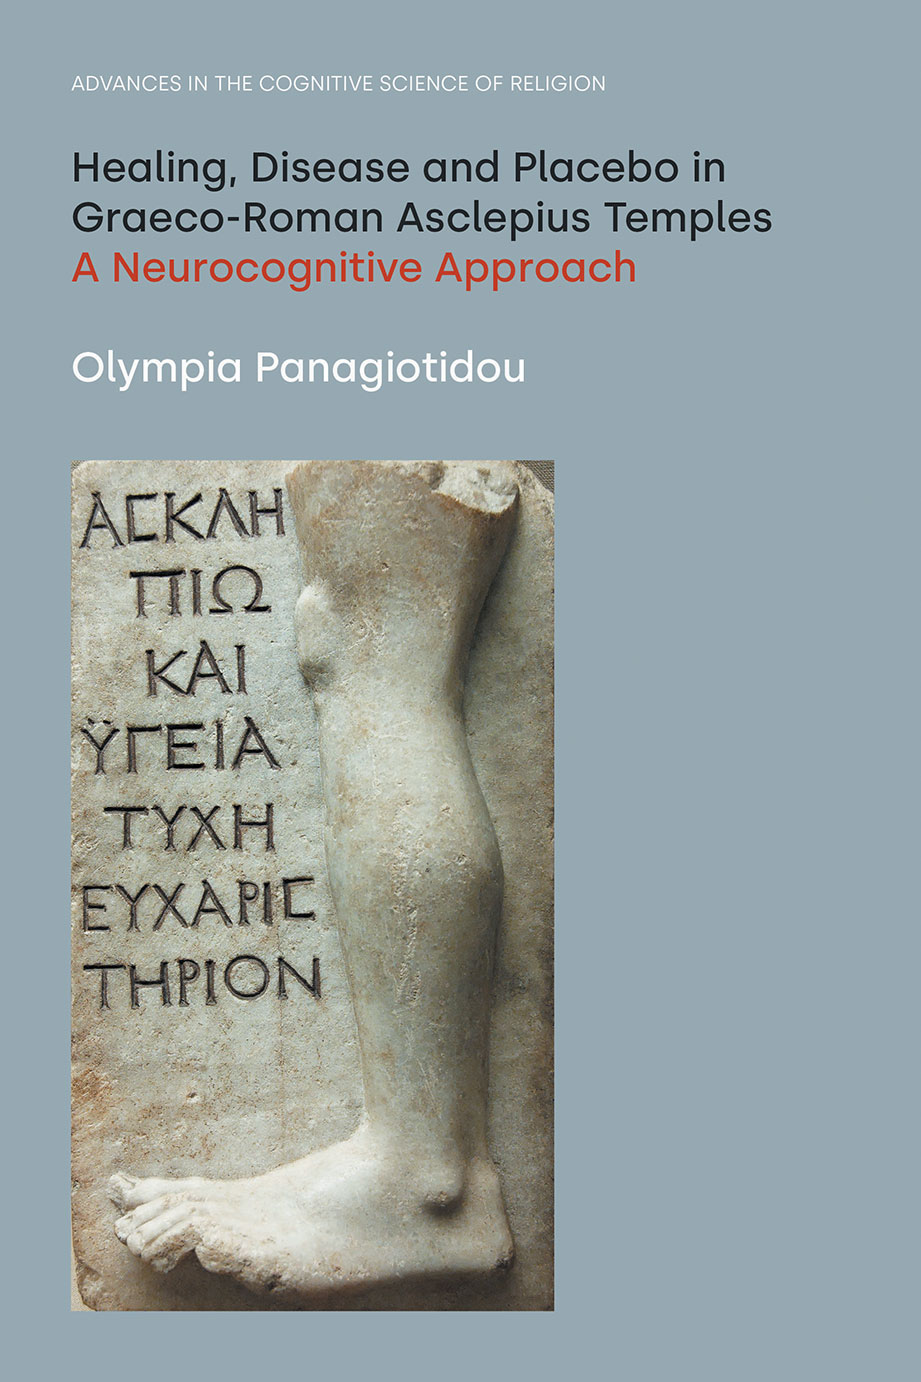 Healing, Disease and Placebo in Graeco-Roman Asclepius Temples